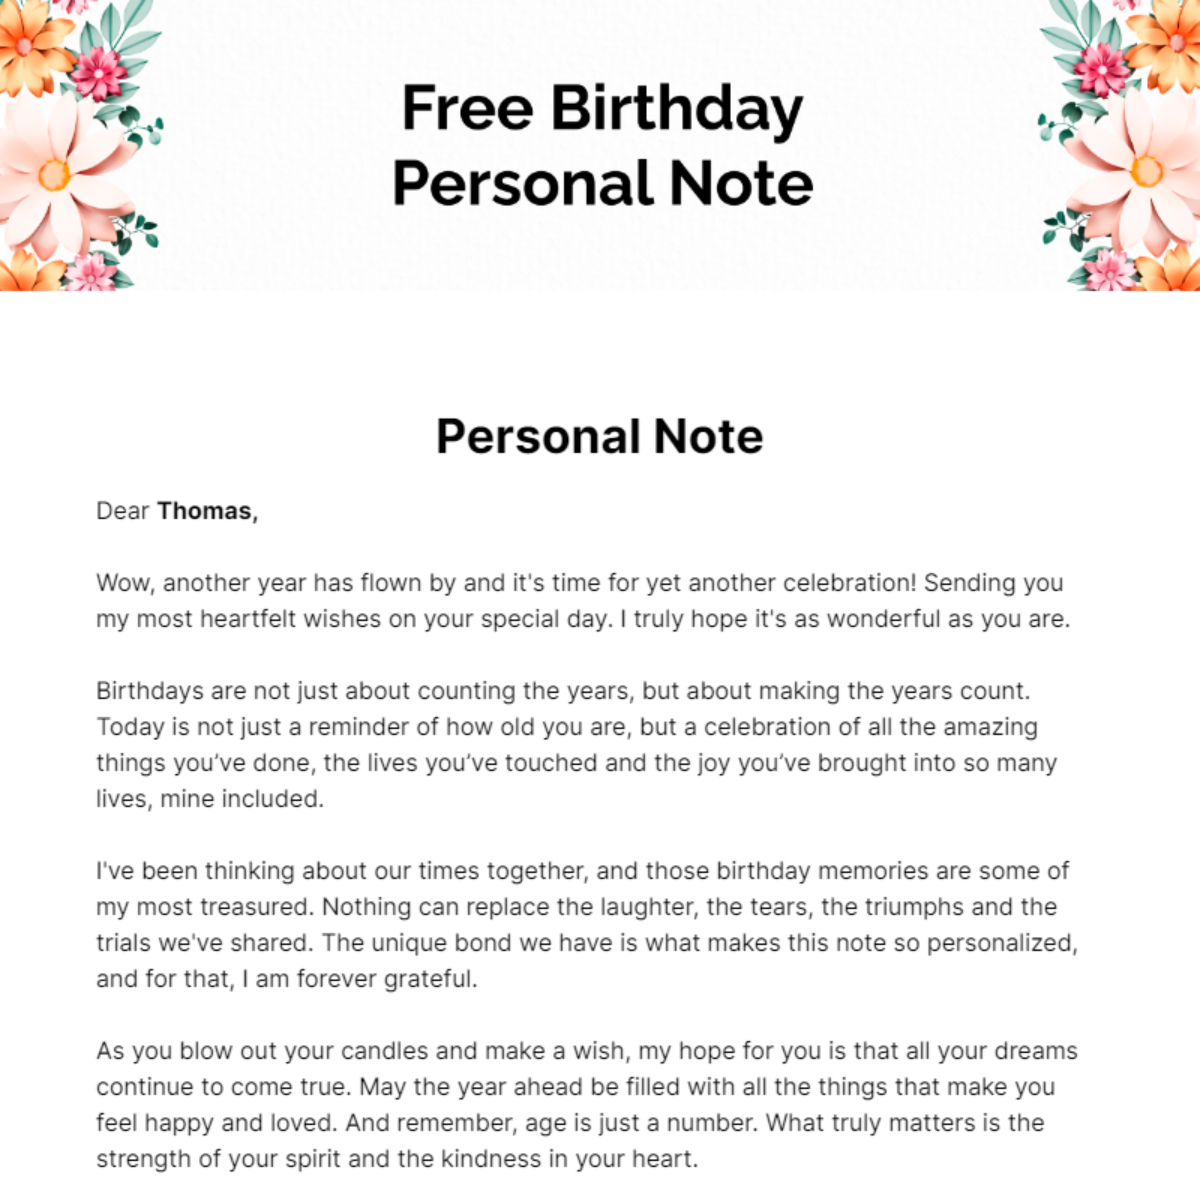 Free Birthday Personal Note Template